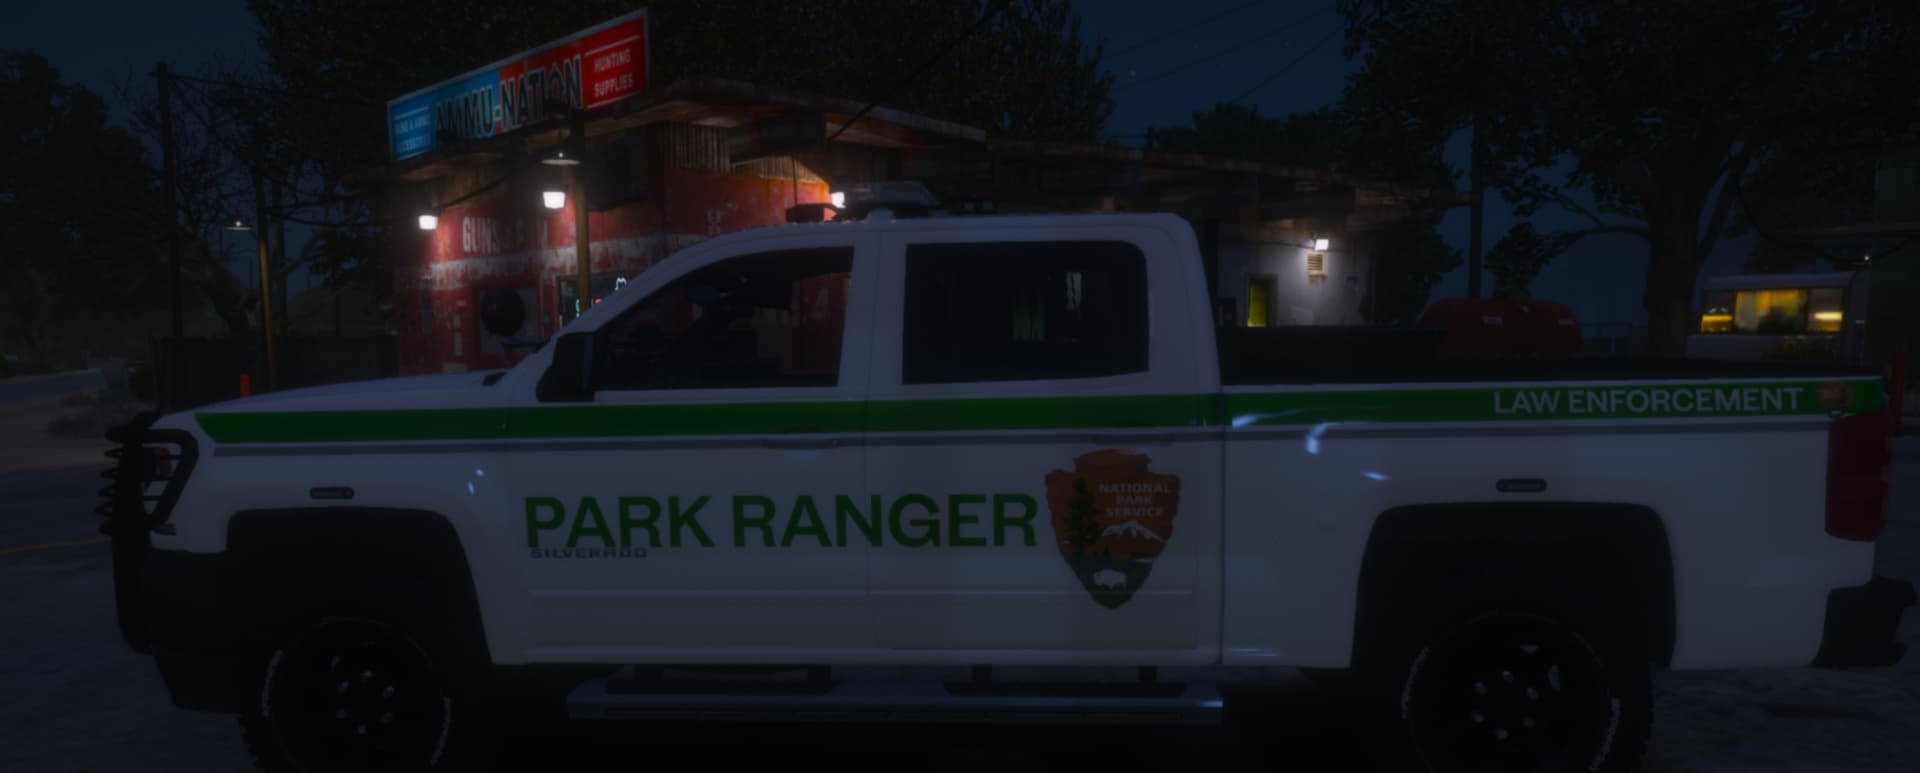 [PAID] [DECAL] U.S Park Ranger Decal Pack! - Releases - Cfx.re Community